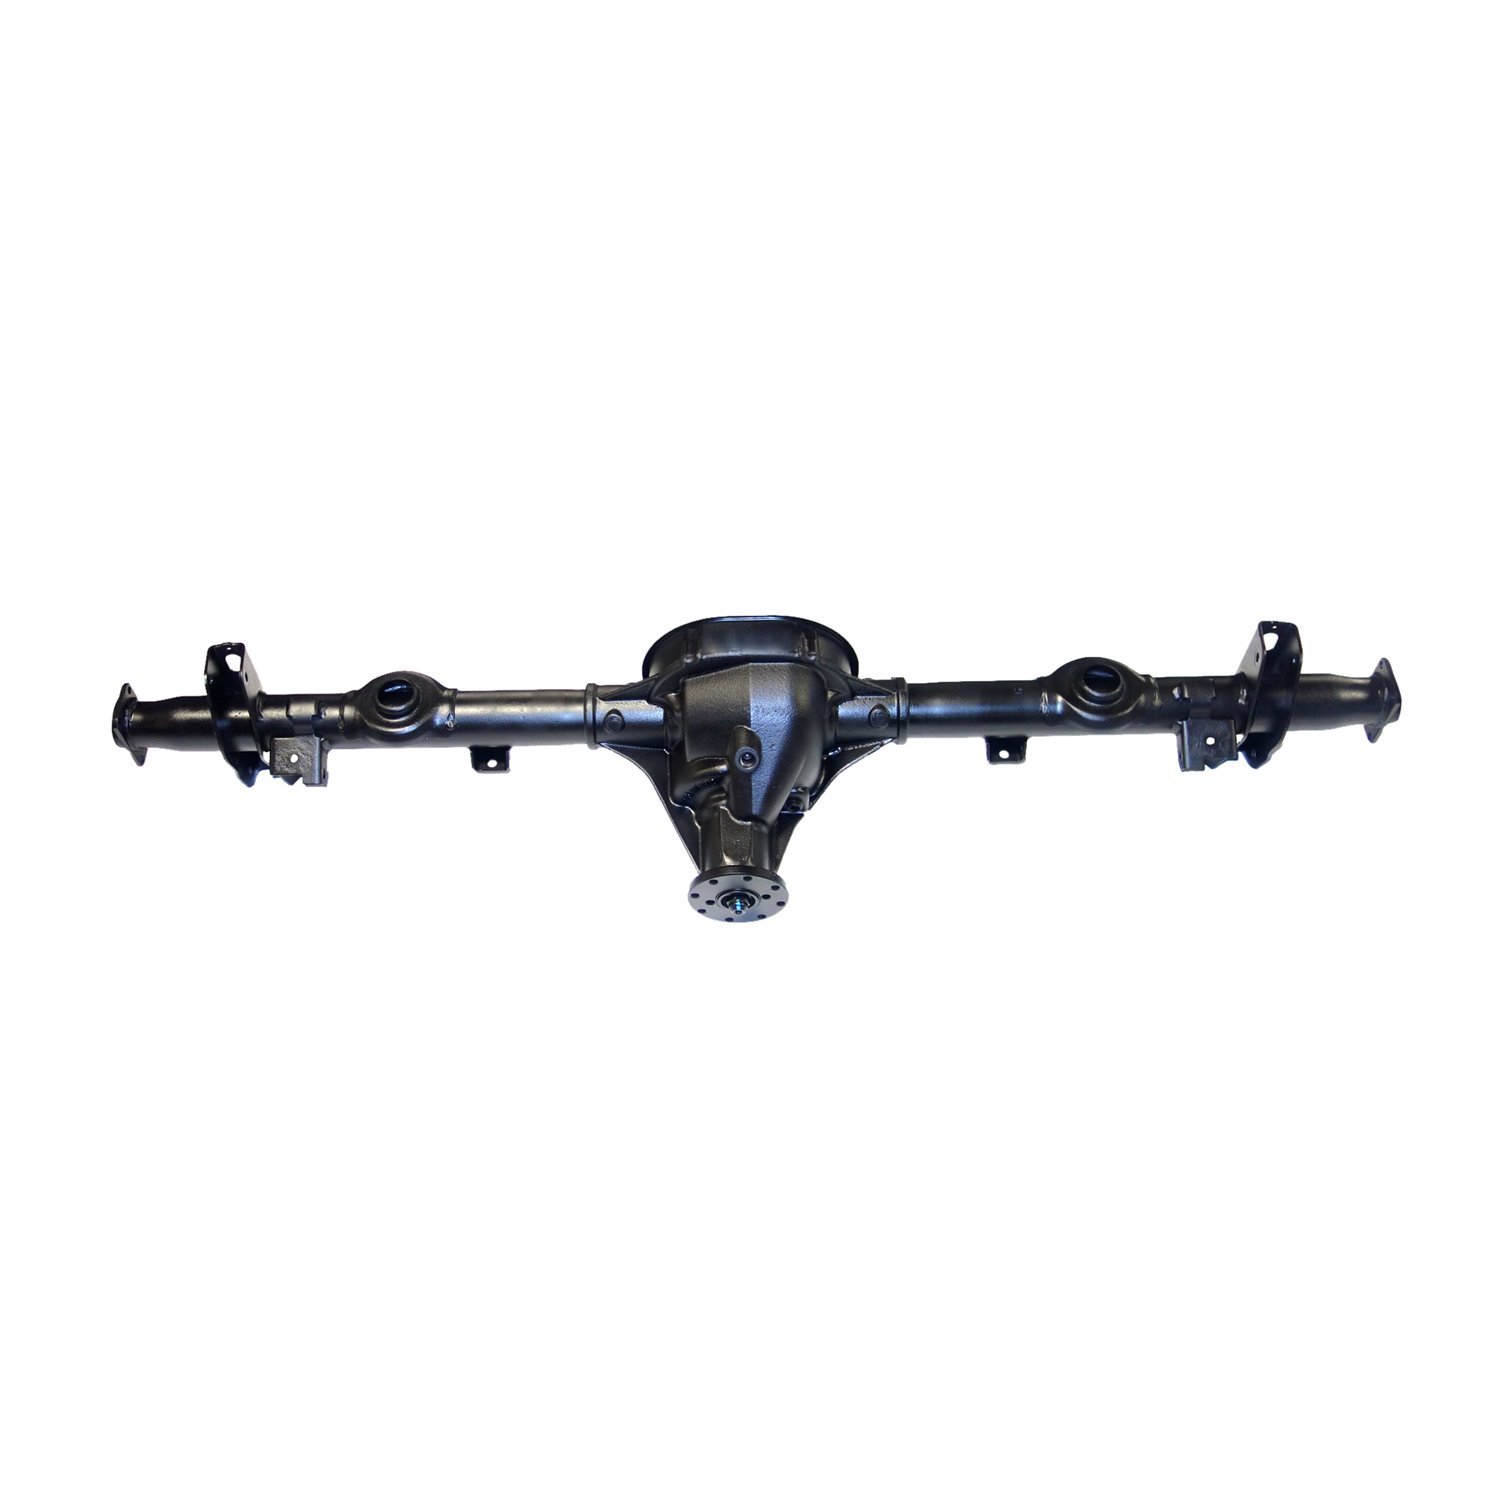 Remanufactured Axle Assembly for 8.8" 1998-00 Crown Vic Police, W/ABS, 3.55 , Open